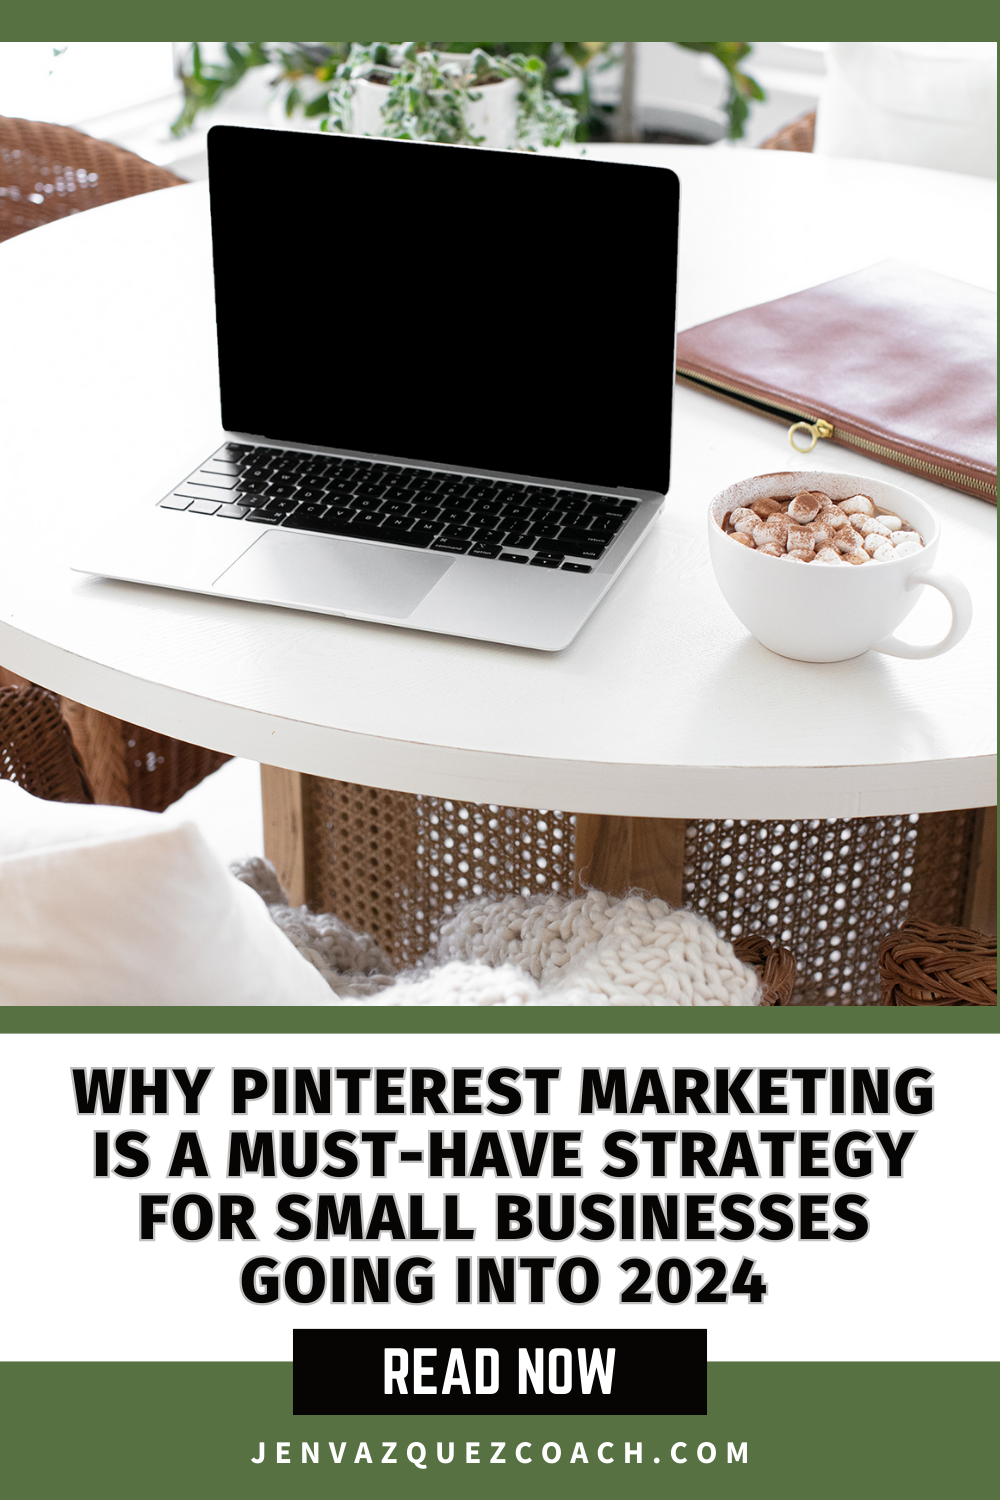 Why Pinterest Marketing is a Must-Have Strategy for Small Businesses going into 2004